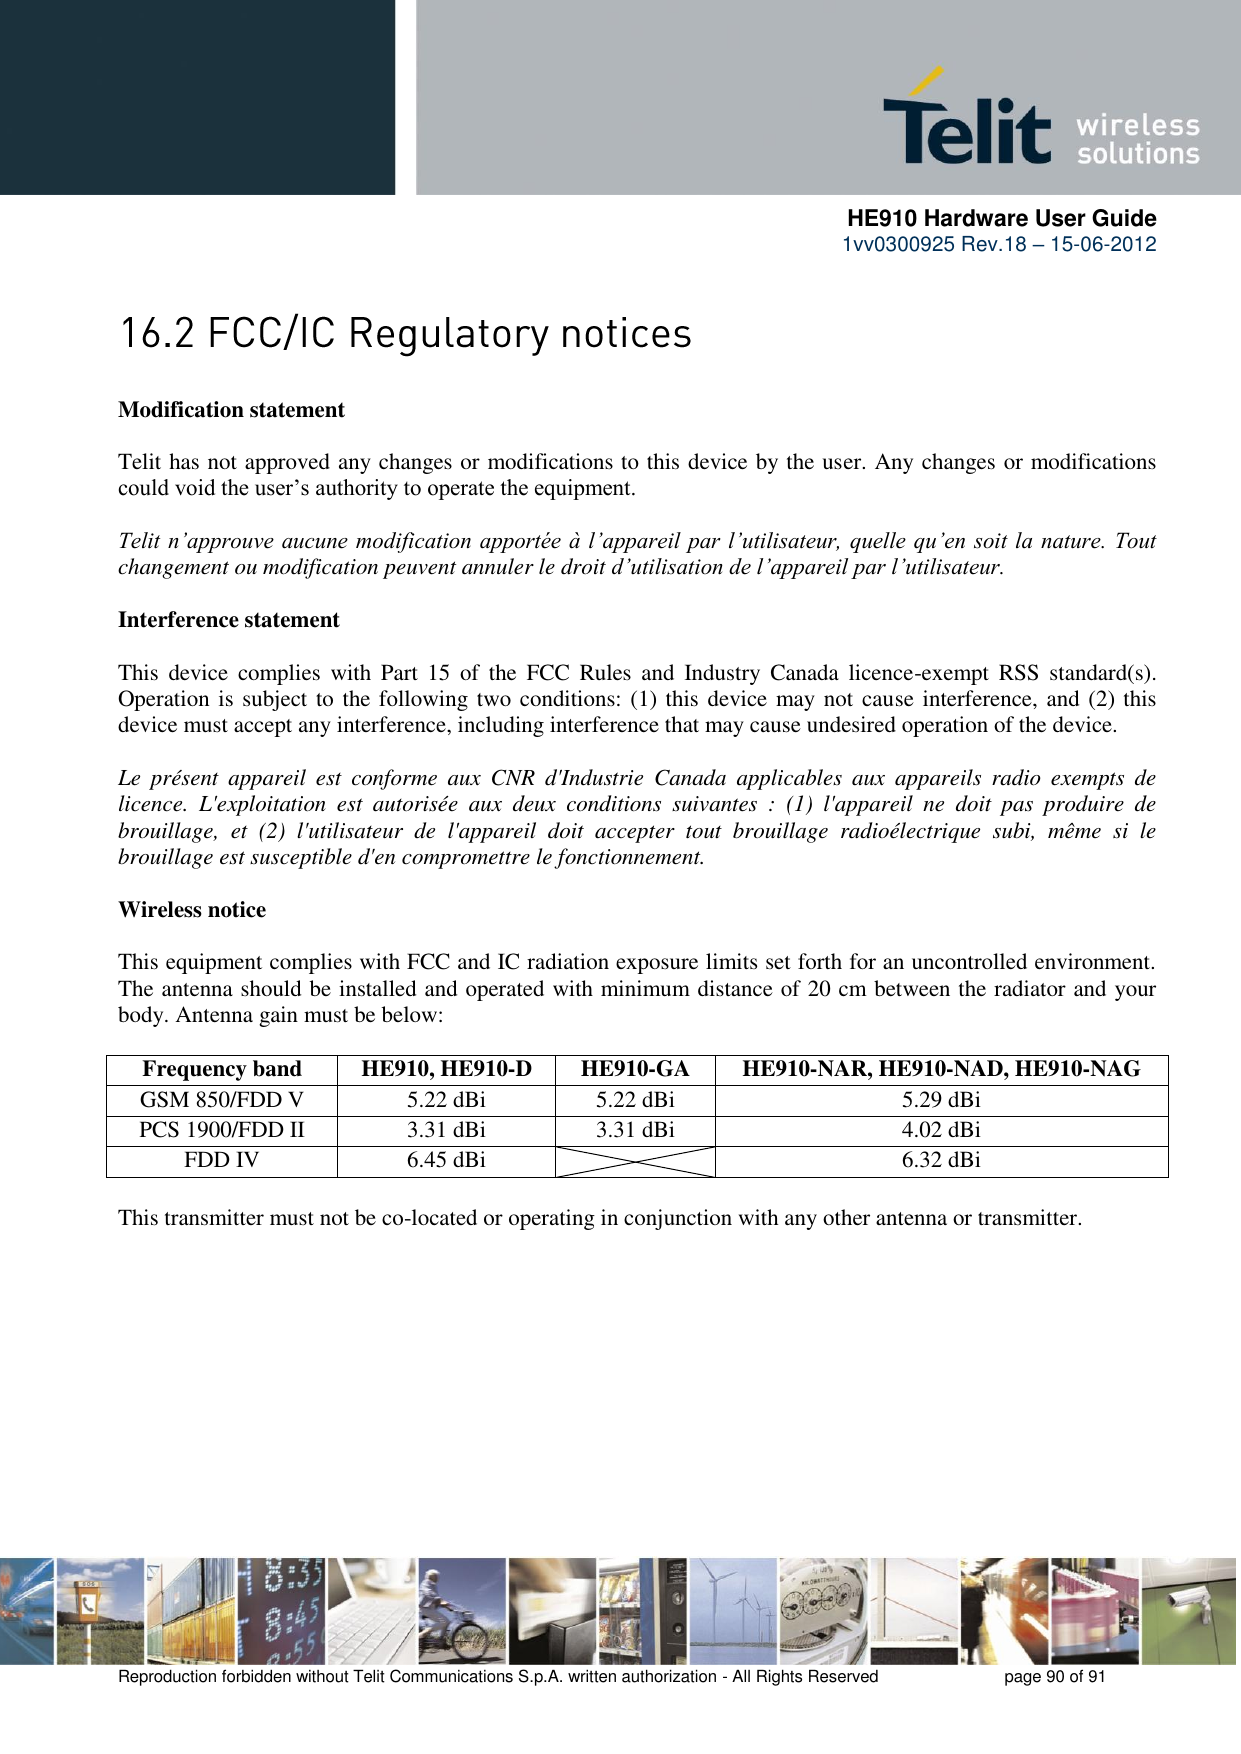      HE910 Hardware User Guide 1vv0300925 Rev.18 – 15-06-2012    Reproduction forbidden without Telit Communications S.p.A. written authorization - All Rights Reserved    page 90 of 91   Modification statement  Telit has not approved any changes or modifications to this device by the user. Any changes or modifications could void the user’s authority to operate the equipment.  Telit n’approuve aucune modification apportée à l’appareil par l’utilisateur, quelle qu’en soit la nature. Tout changement ou modification peuvent annuler le droit d’utilisation de l’appareil par l’utilisateur.  Interference statement  This  device  complies  with  Part  15  of  the  FCC  Rules  and  Industry  Canada  licence-exempt  RSS  standard(s). Operation is subject to the following two conditions: (1) this device may not cause interference, and (2) this device must accept any interference, including interference that may cause undesired operation of the device.  Le  présent  appareil  est  conforme  aux  CNR  d&apos;Industrie  Canada  applicables  aux  appareils  radio  exempts  de licence.  L&apos;exploitation  est  autorisée  aux  deux  conditions  suivantes  :  (1)  l&apos;appareil  ne  doit  pas  produire  de brouillage,  et  (2)  l&apos;utilisateur  de  l&apos;appareil  doit  accepter  tout  brouillage  radioélectrique  subi,  même  si  le brouillage est susceptible d&apos;en compromettre le fonctionnement.  Wireless notice  This equipment complies with FCC and IC radiation exposure limits set forth for an uncontrolled environment. The antenna should be installed and operated with minimum distance of 20 cm between the radiator and your body. Antenna gain must be below:  Frequency band HE910, HE910-D HE910-GA HE910-NAR, HE910-NAD, HE910-NAG GSM 850/FDD V 5.22 dBi 5.22 dBi 5.29 dBi PCS 1900/FDD II 3.31 dBi 3.31 dBi 4.02 dBi FDD IV 6.45 dBi  6.32 dBi  This transmitter must not be co-located or operating in conjunction with any other antenna or transmitter.  